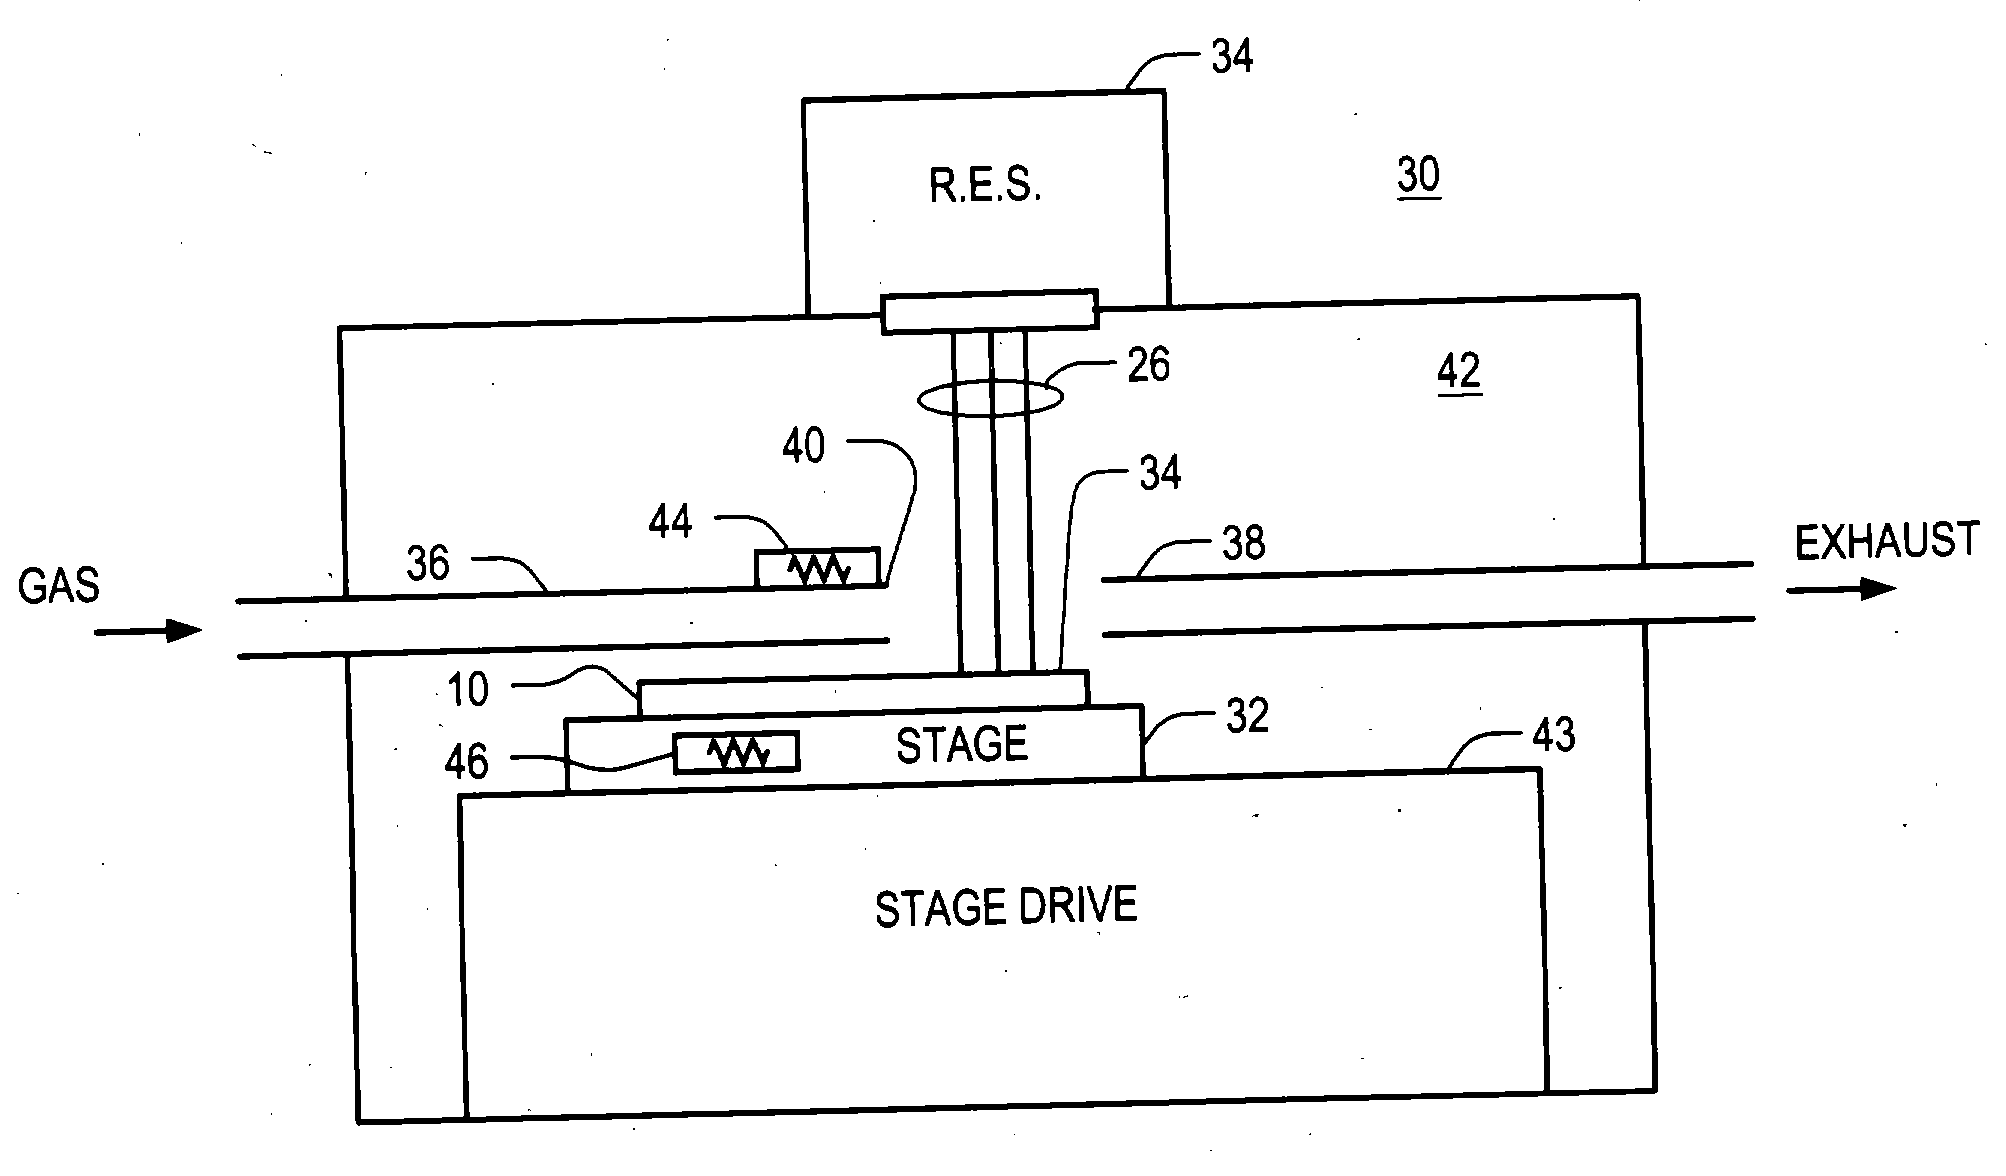 Apparatus and method for fabrication of nanostructures using decoupled heating of constituents